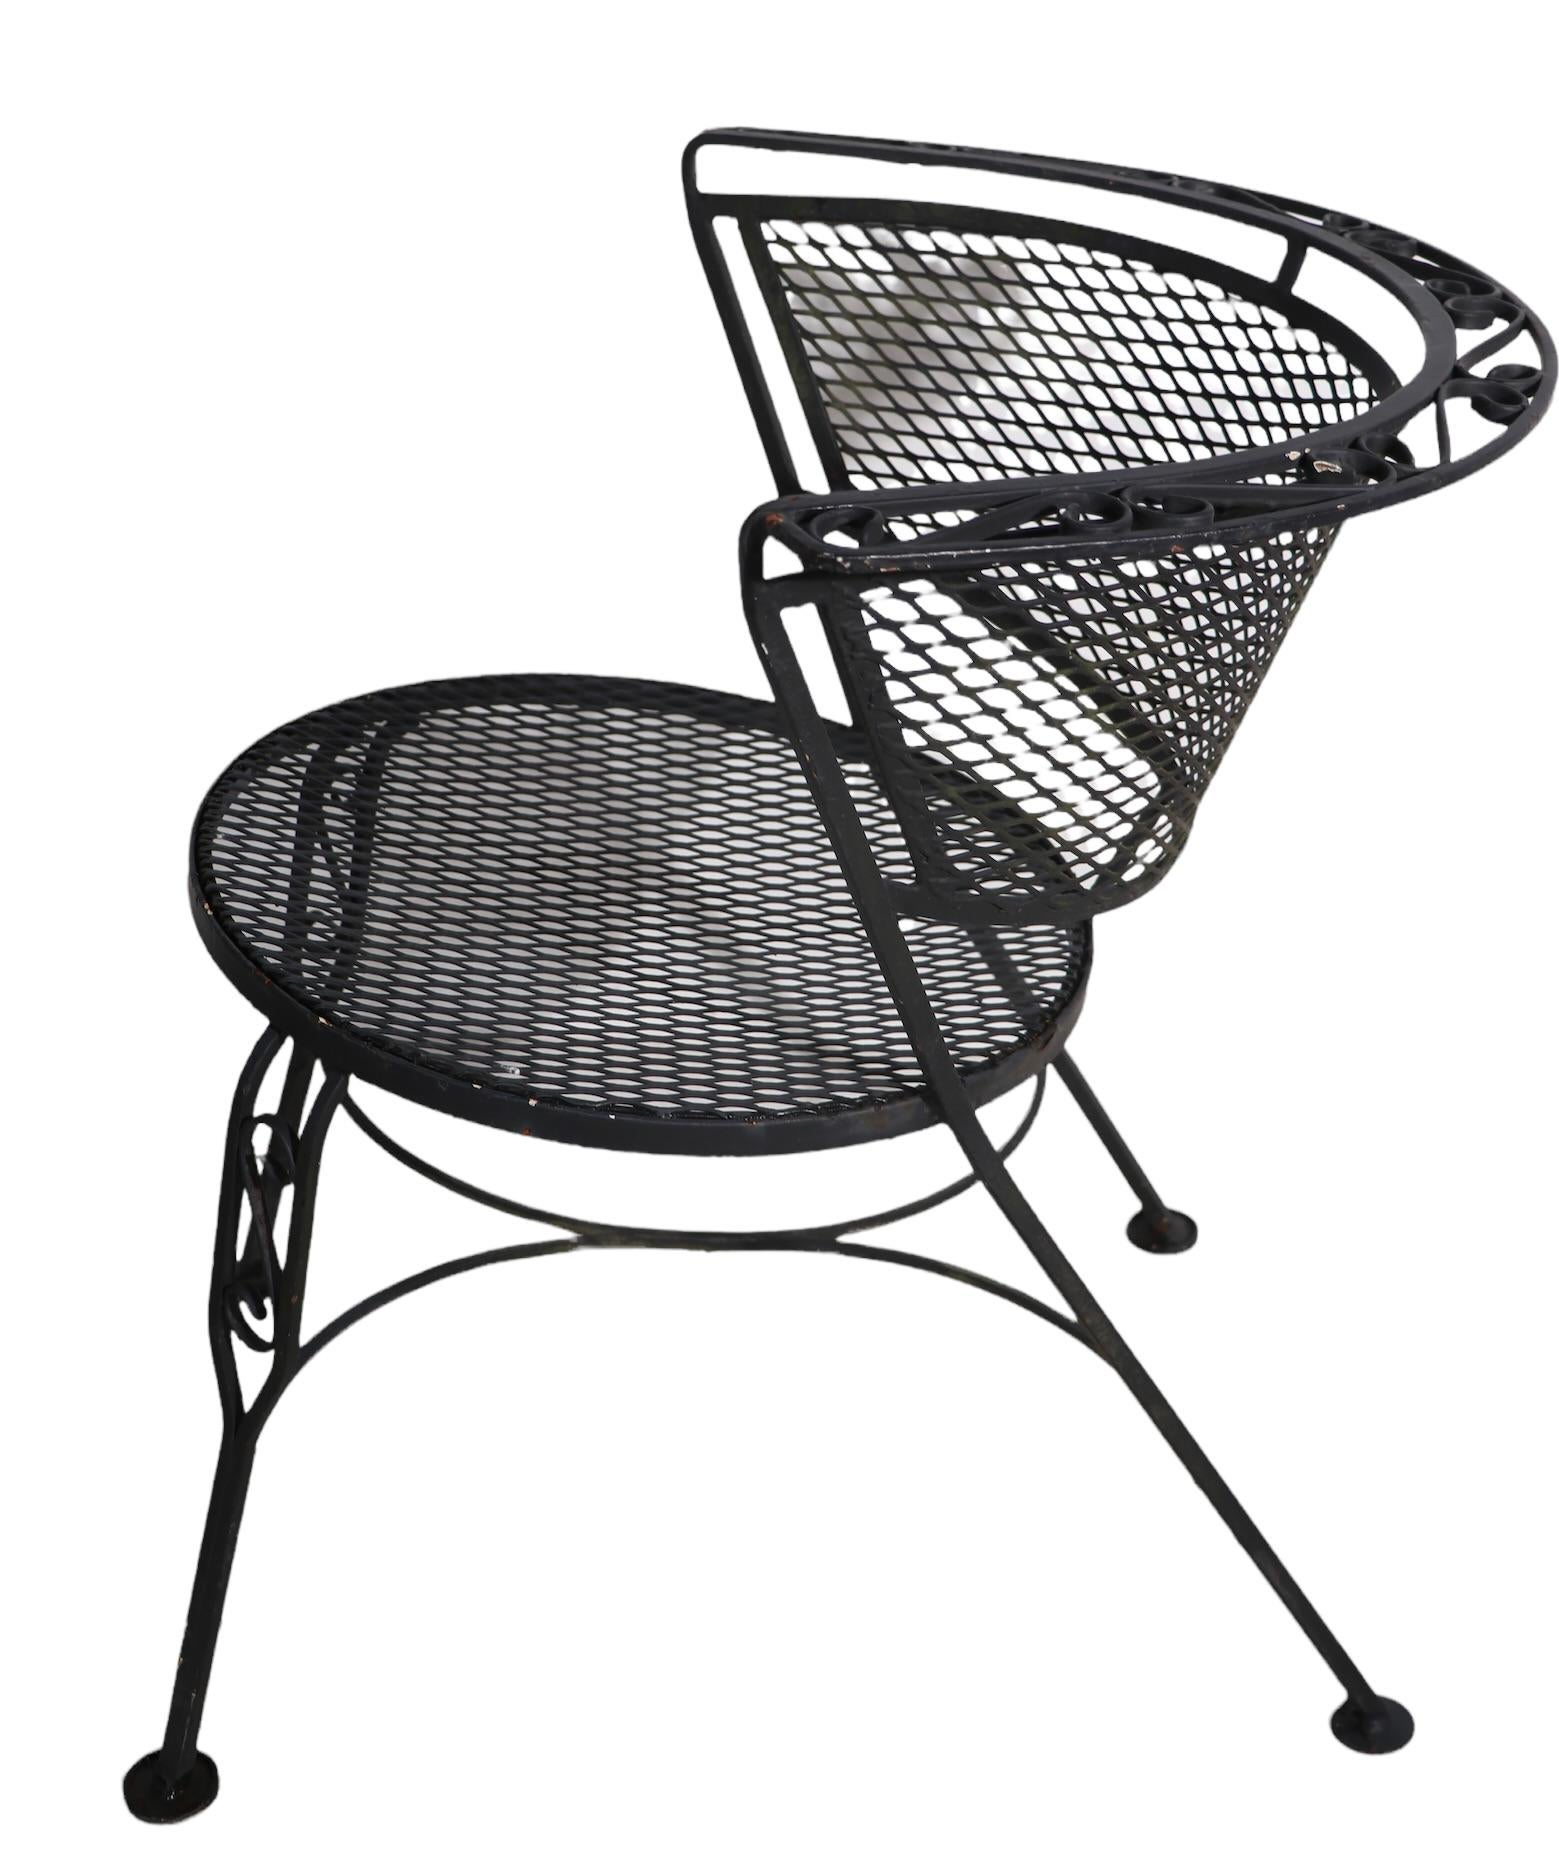 Pr. Decorative Garden Patio Poolside Wrought Iron Chairs by Woodard In Good Condition For Sale In New York, NY